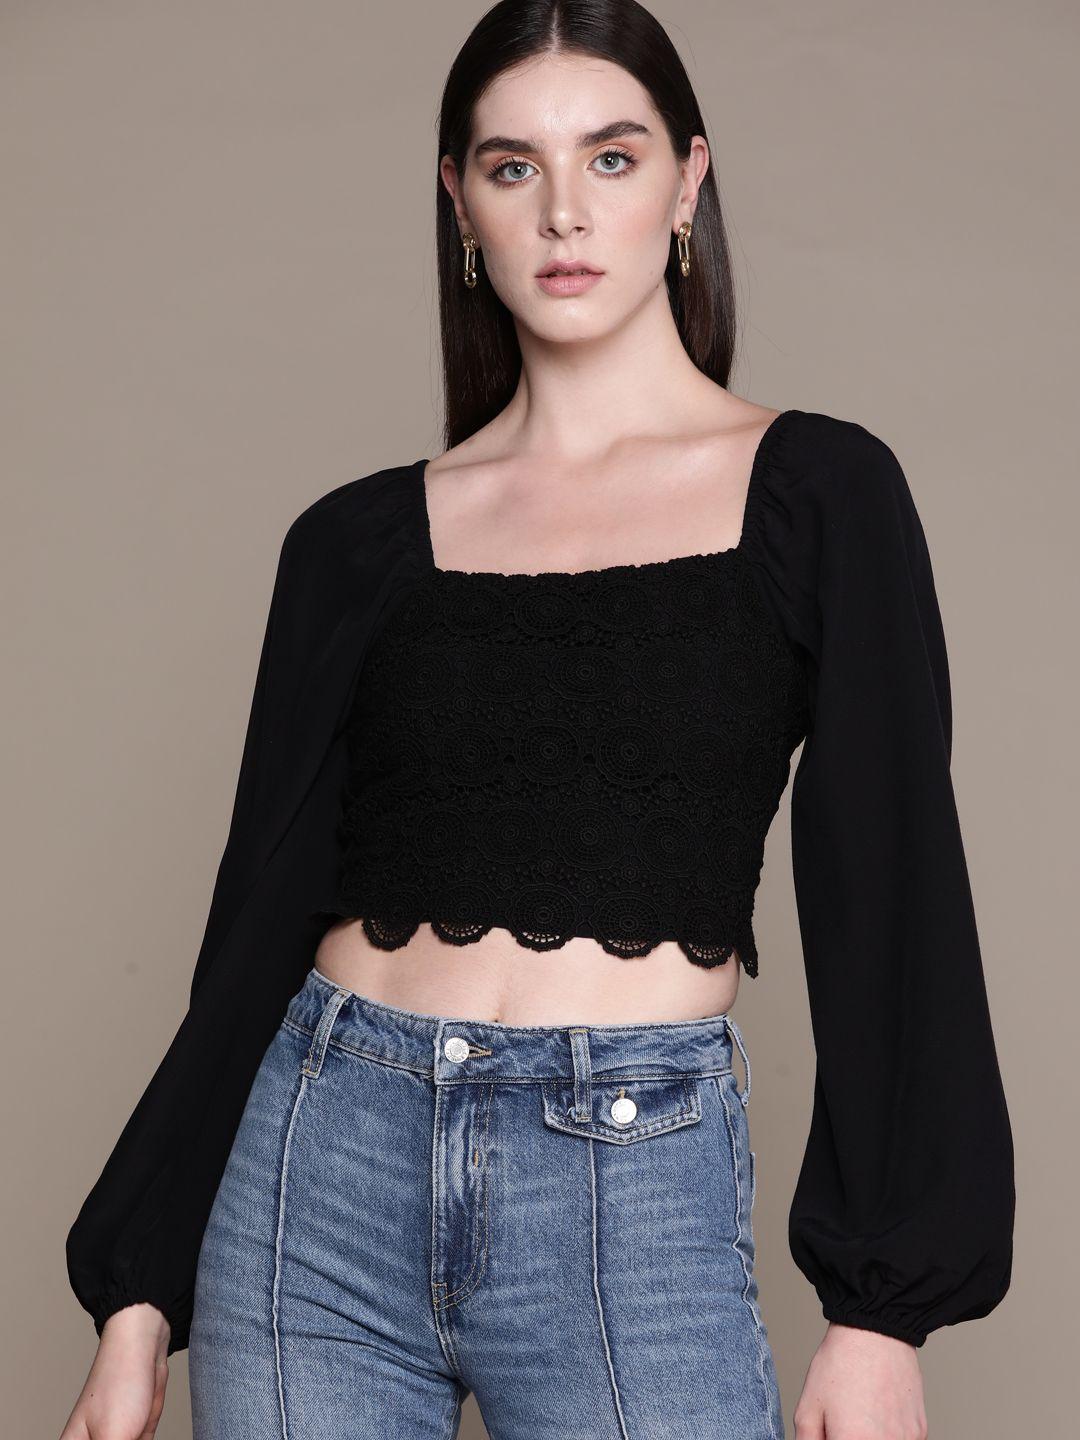 bebe sable-black future glam puff sleeves lace-inserts crop top